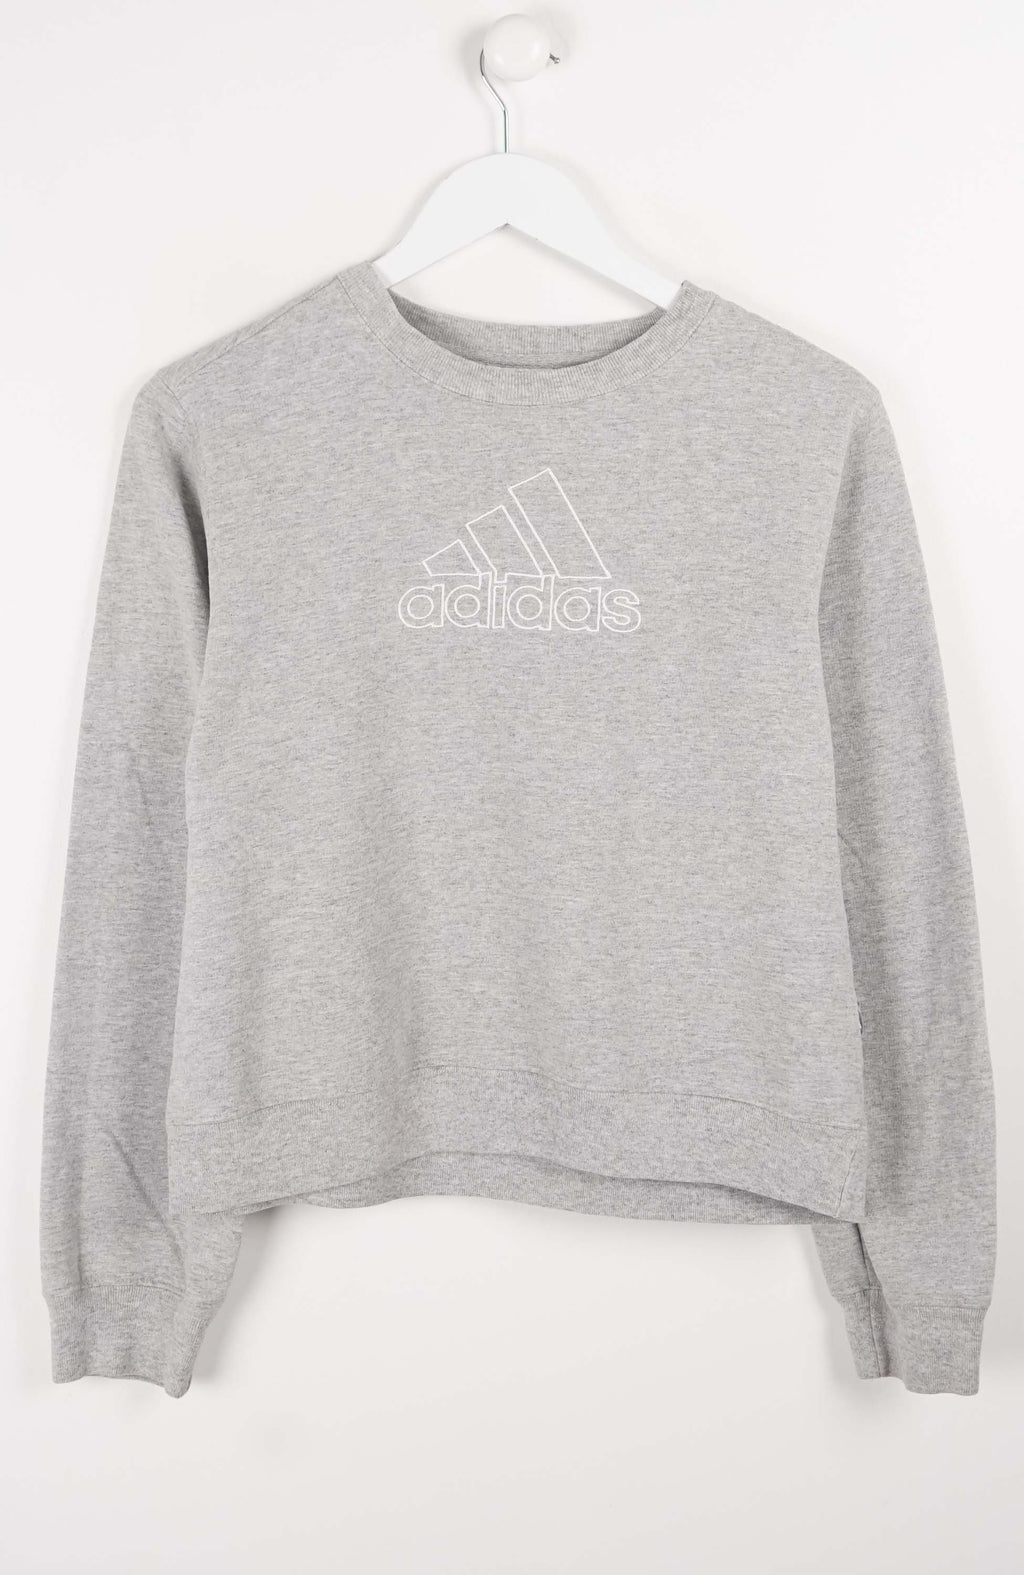 VINTAGE ADIDAS CROPPED SWEATER (S) 